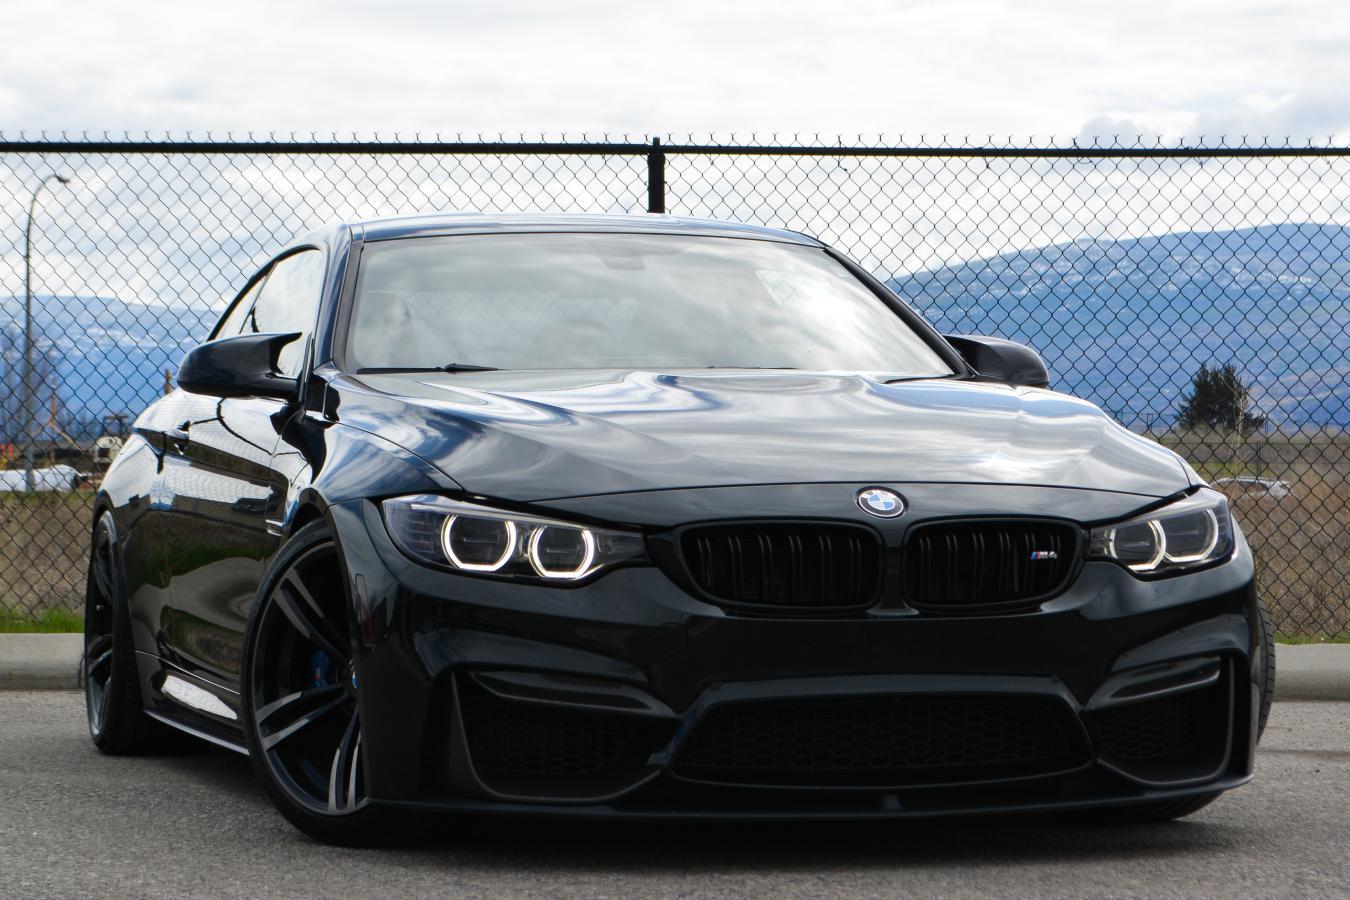 2016 BMW M4 M4 Coupe, 6 Speed Manual, No Claims, Tasteful Mods